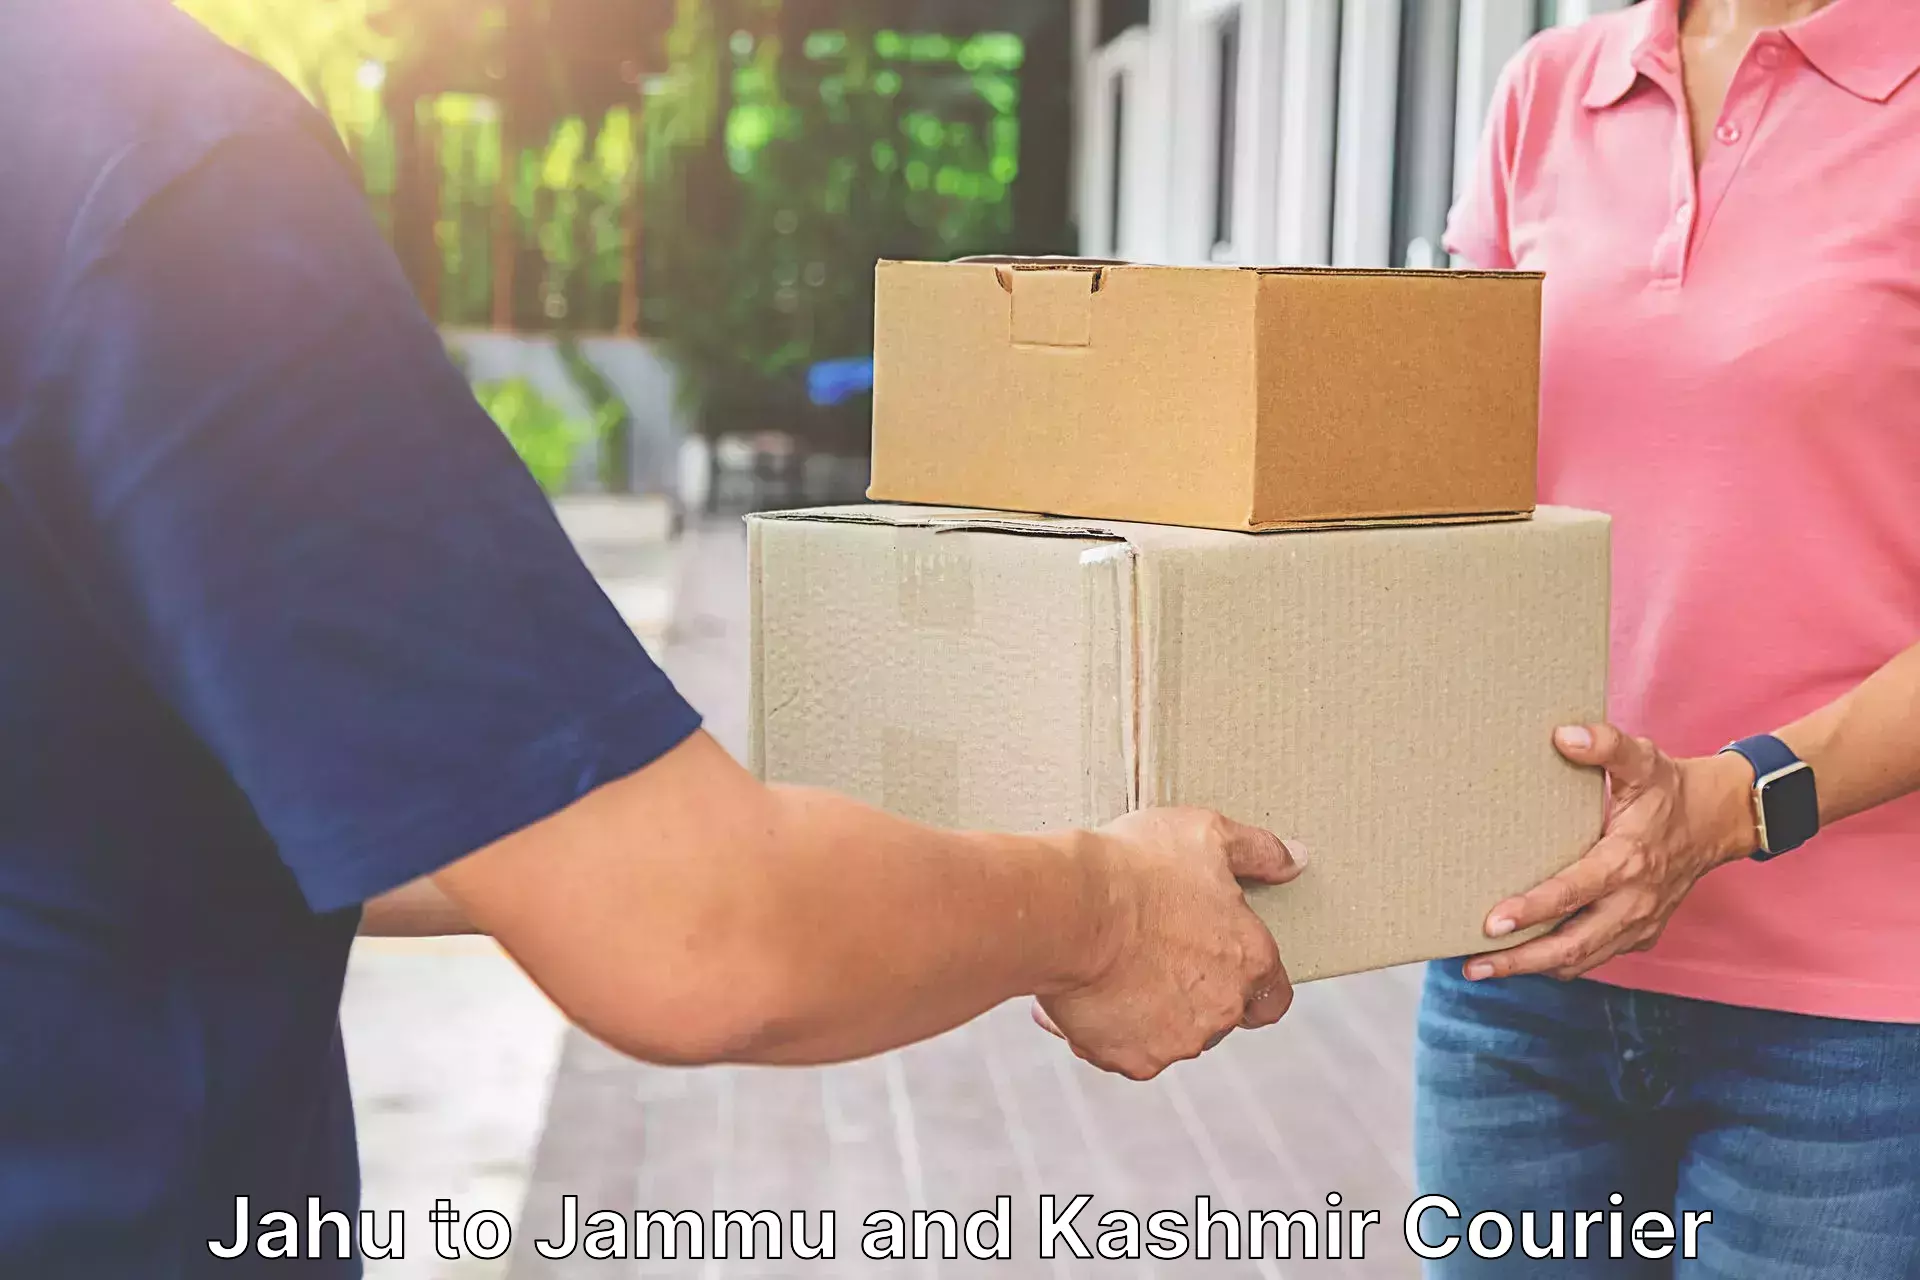 Corporate courier solutions Jahu to Jammu and Kashmir